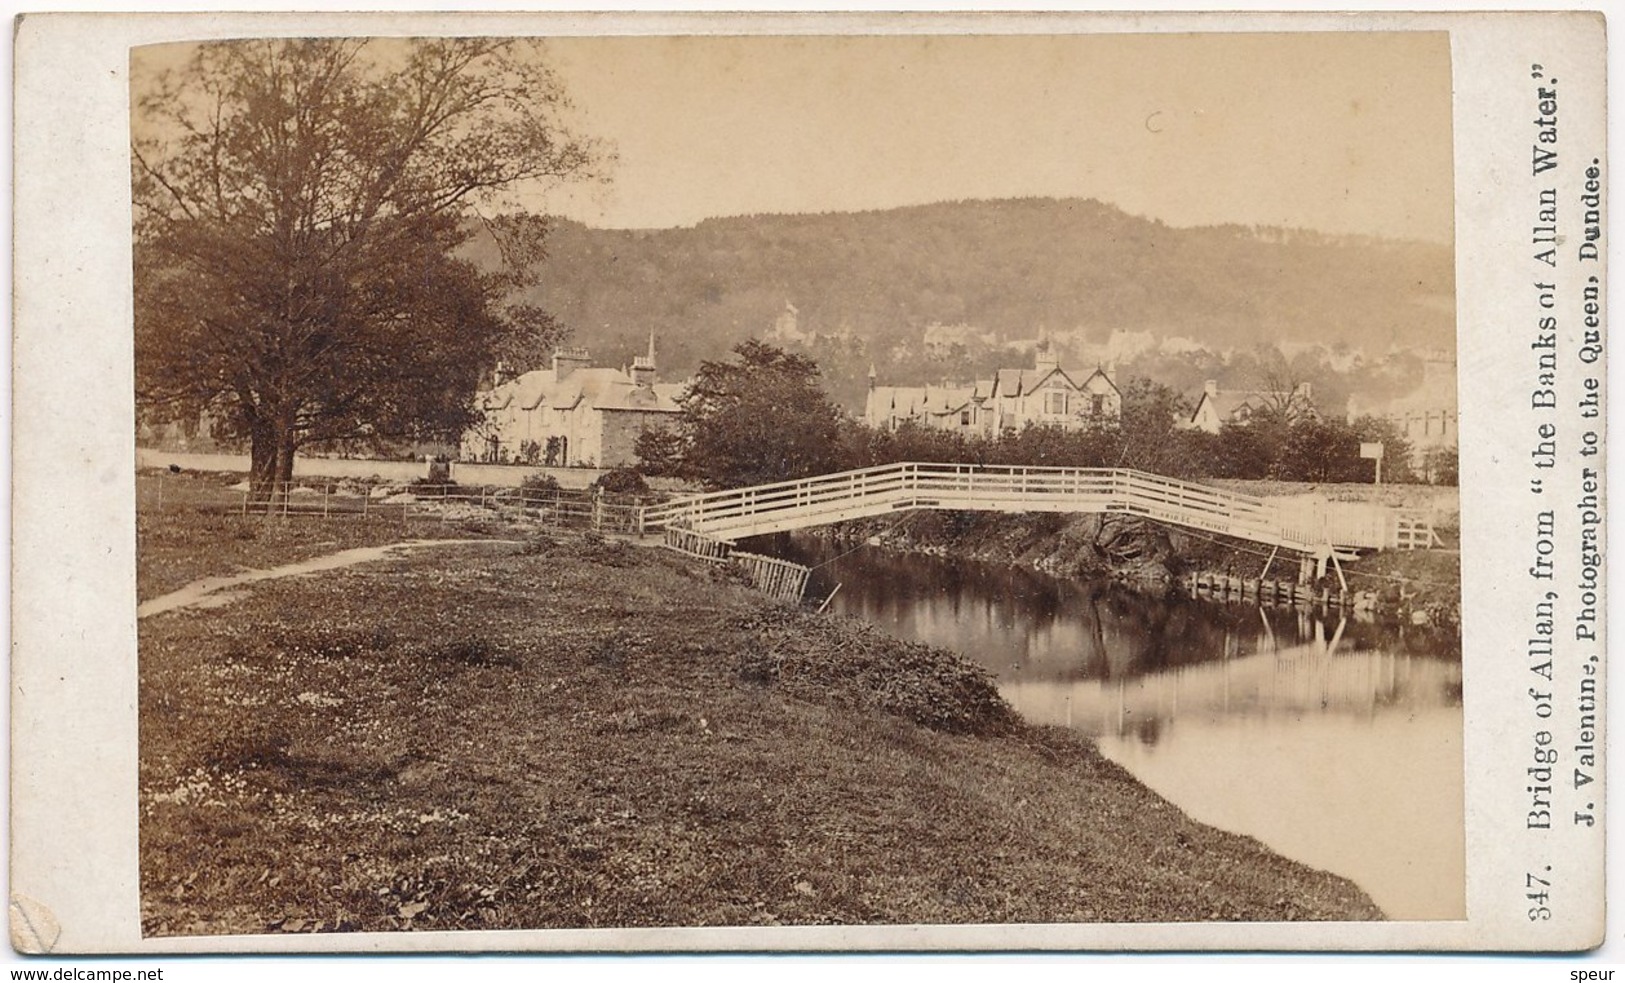 CDV Late 19th Century, Bridge Of Allan, From "The Banks Of Allan Water", Nr. 347 Of A Series. - Old (before 1900)